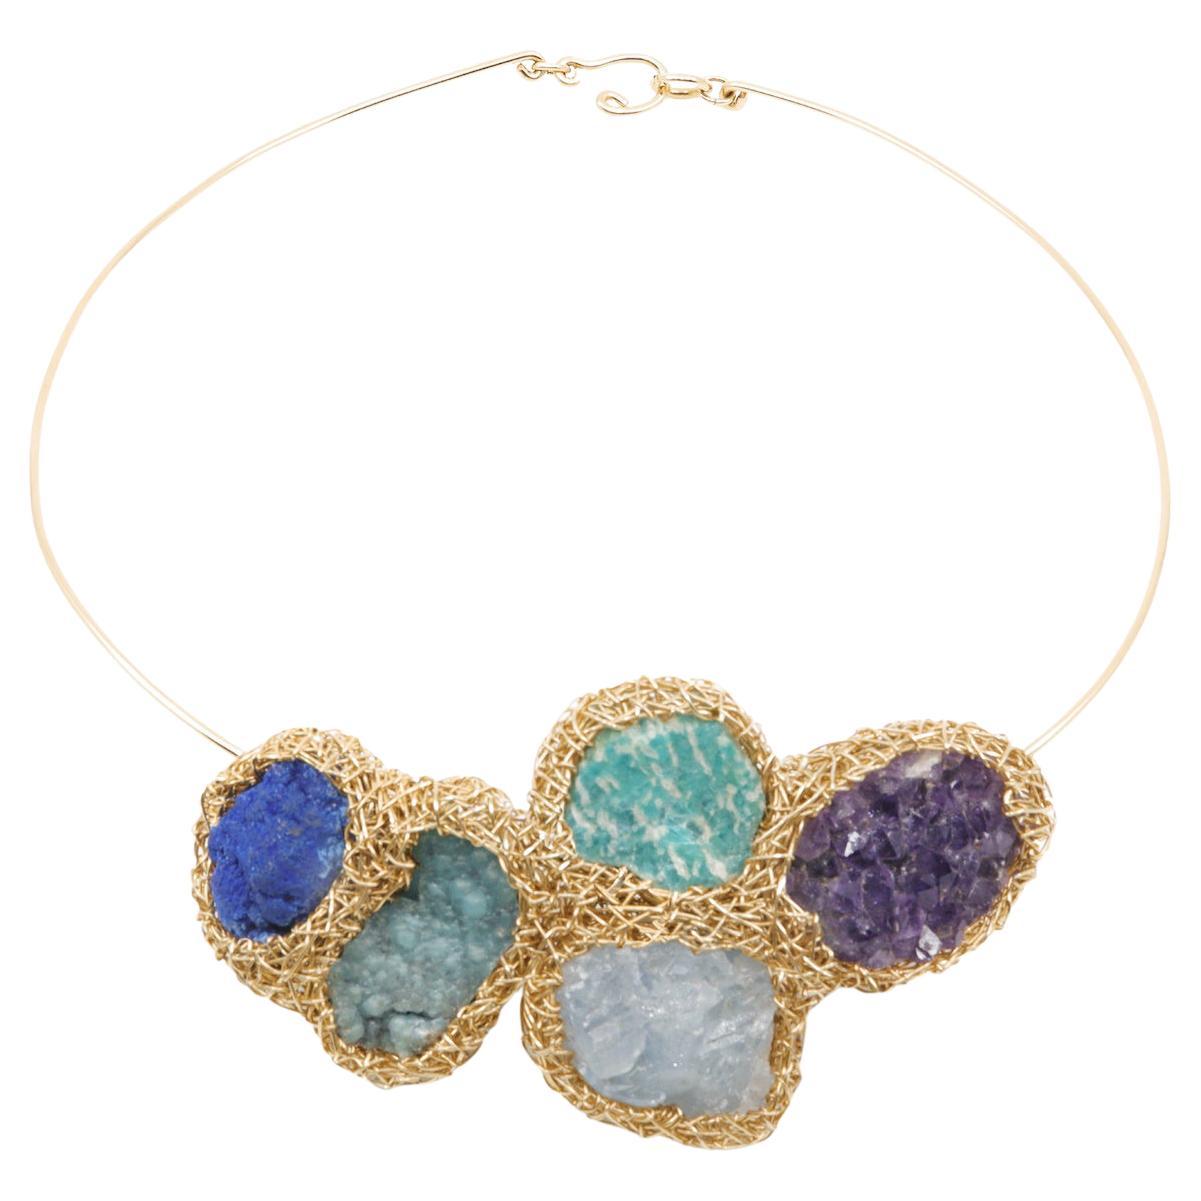 One-Off Raw Stone Cluster Necklace in 14kt Yellow Gold F. by the Artist Herself